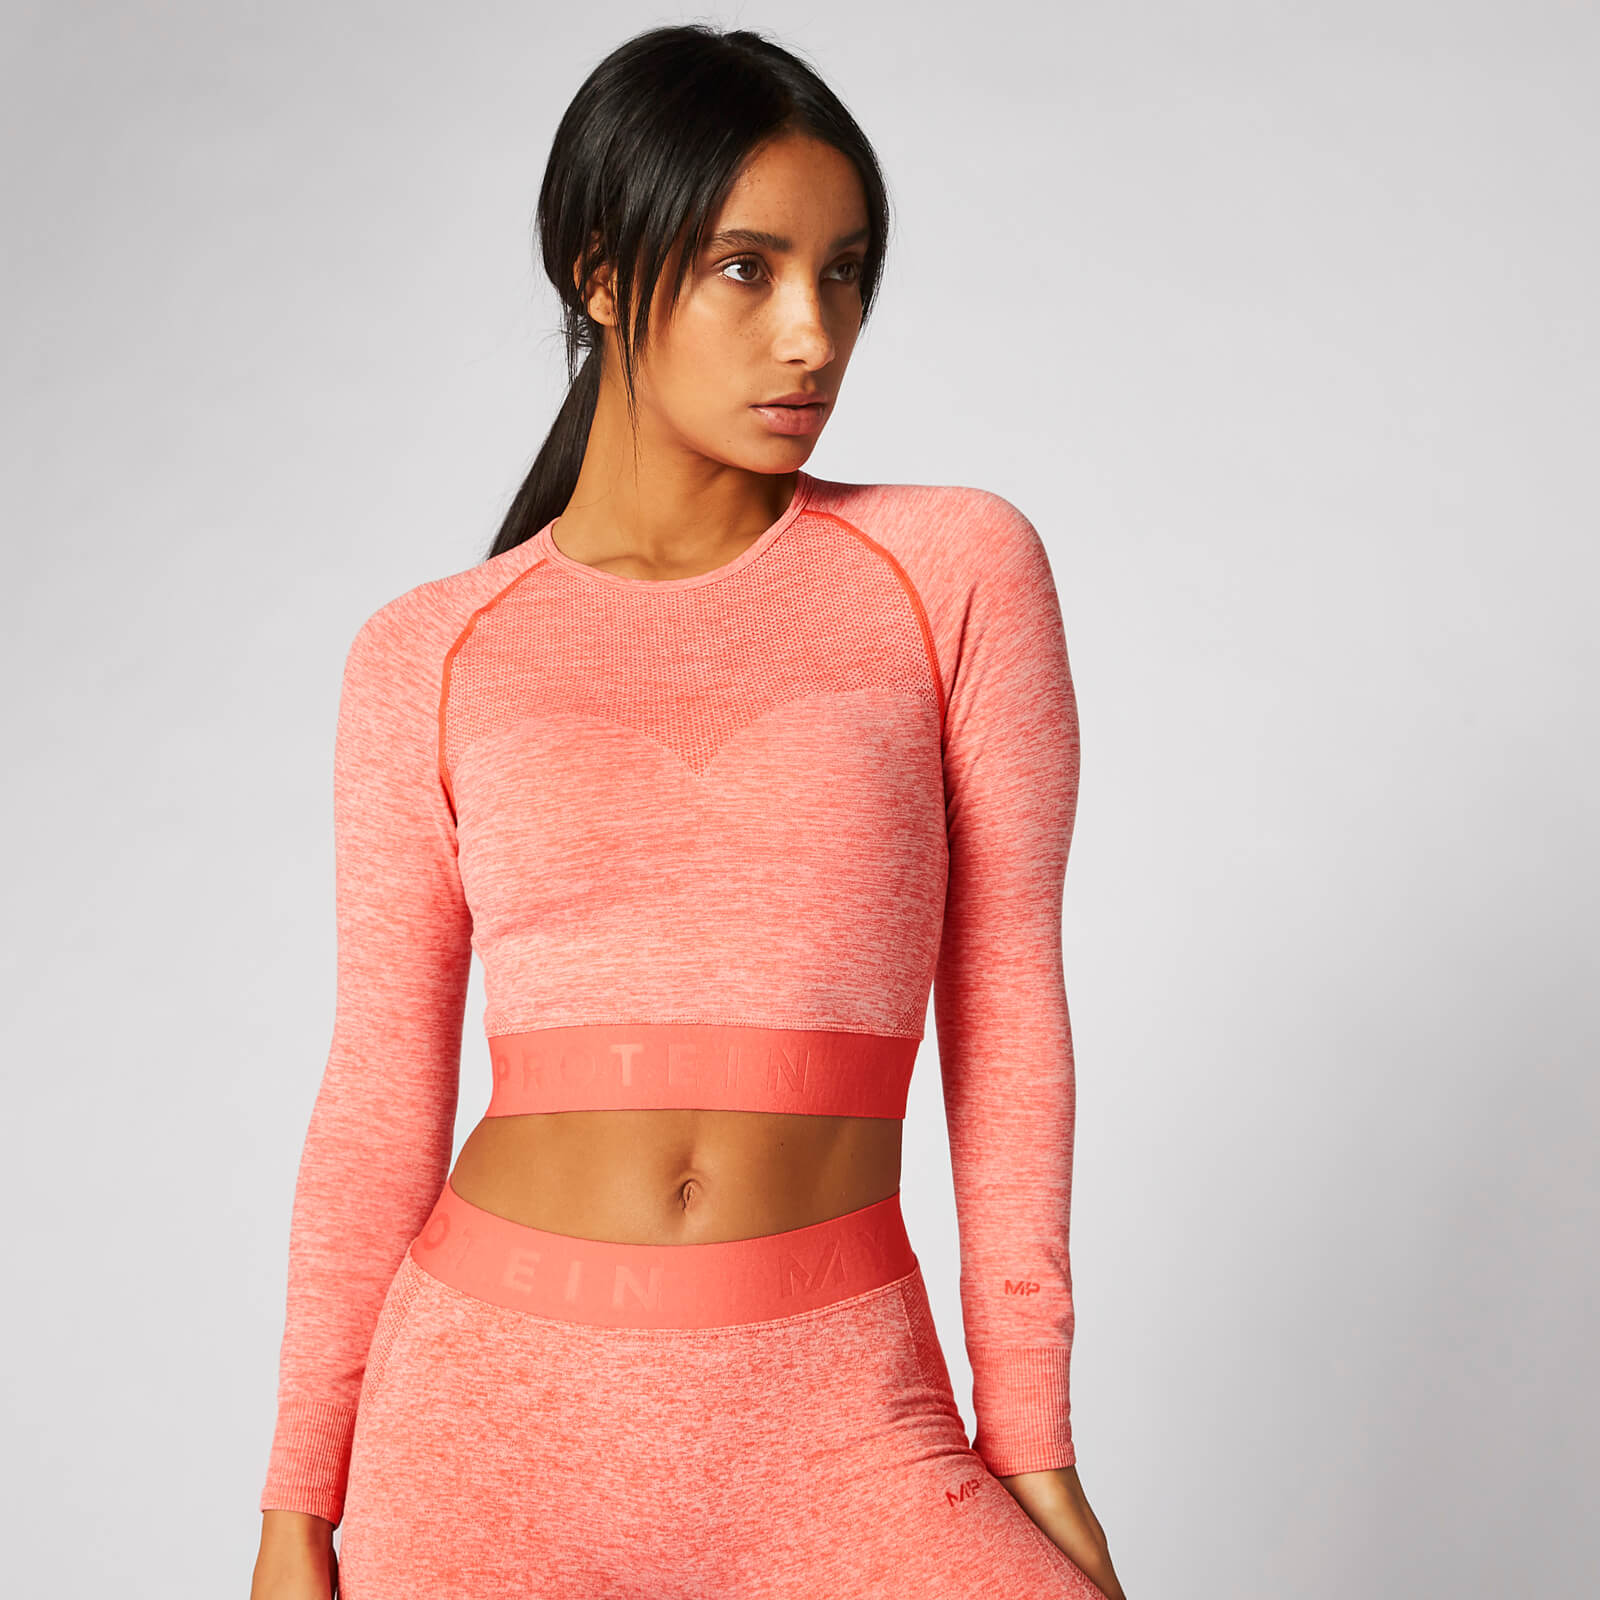 Inspire Seamless Crop Top - Hot Coral - XS